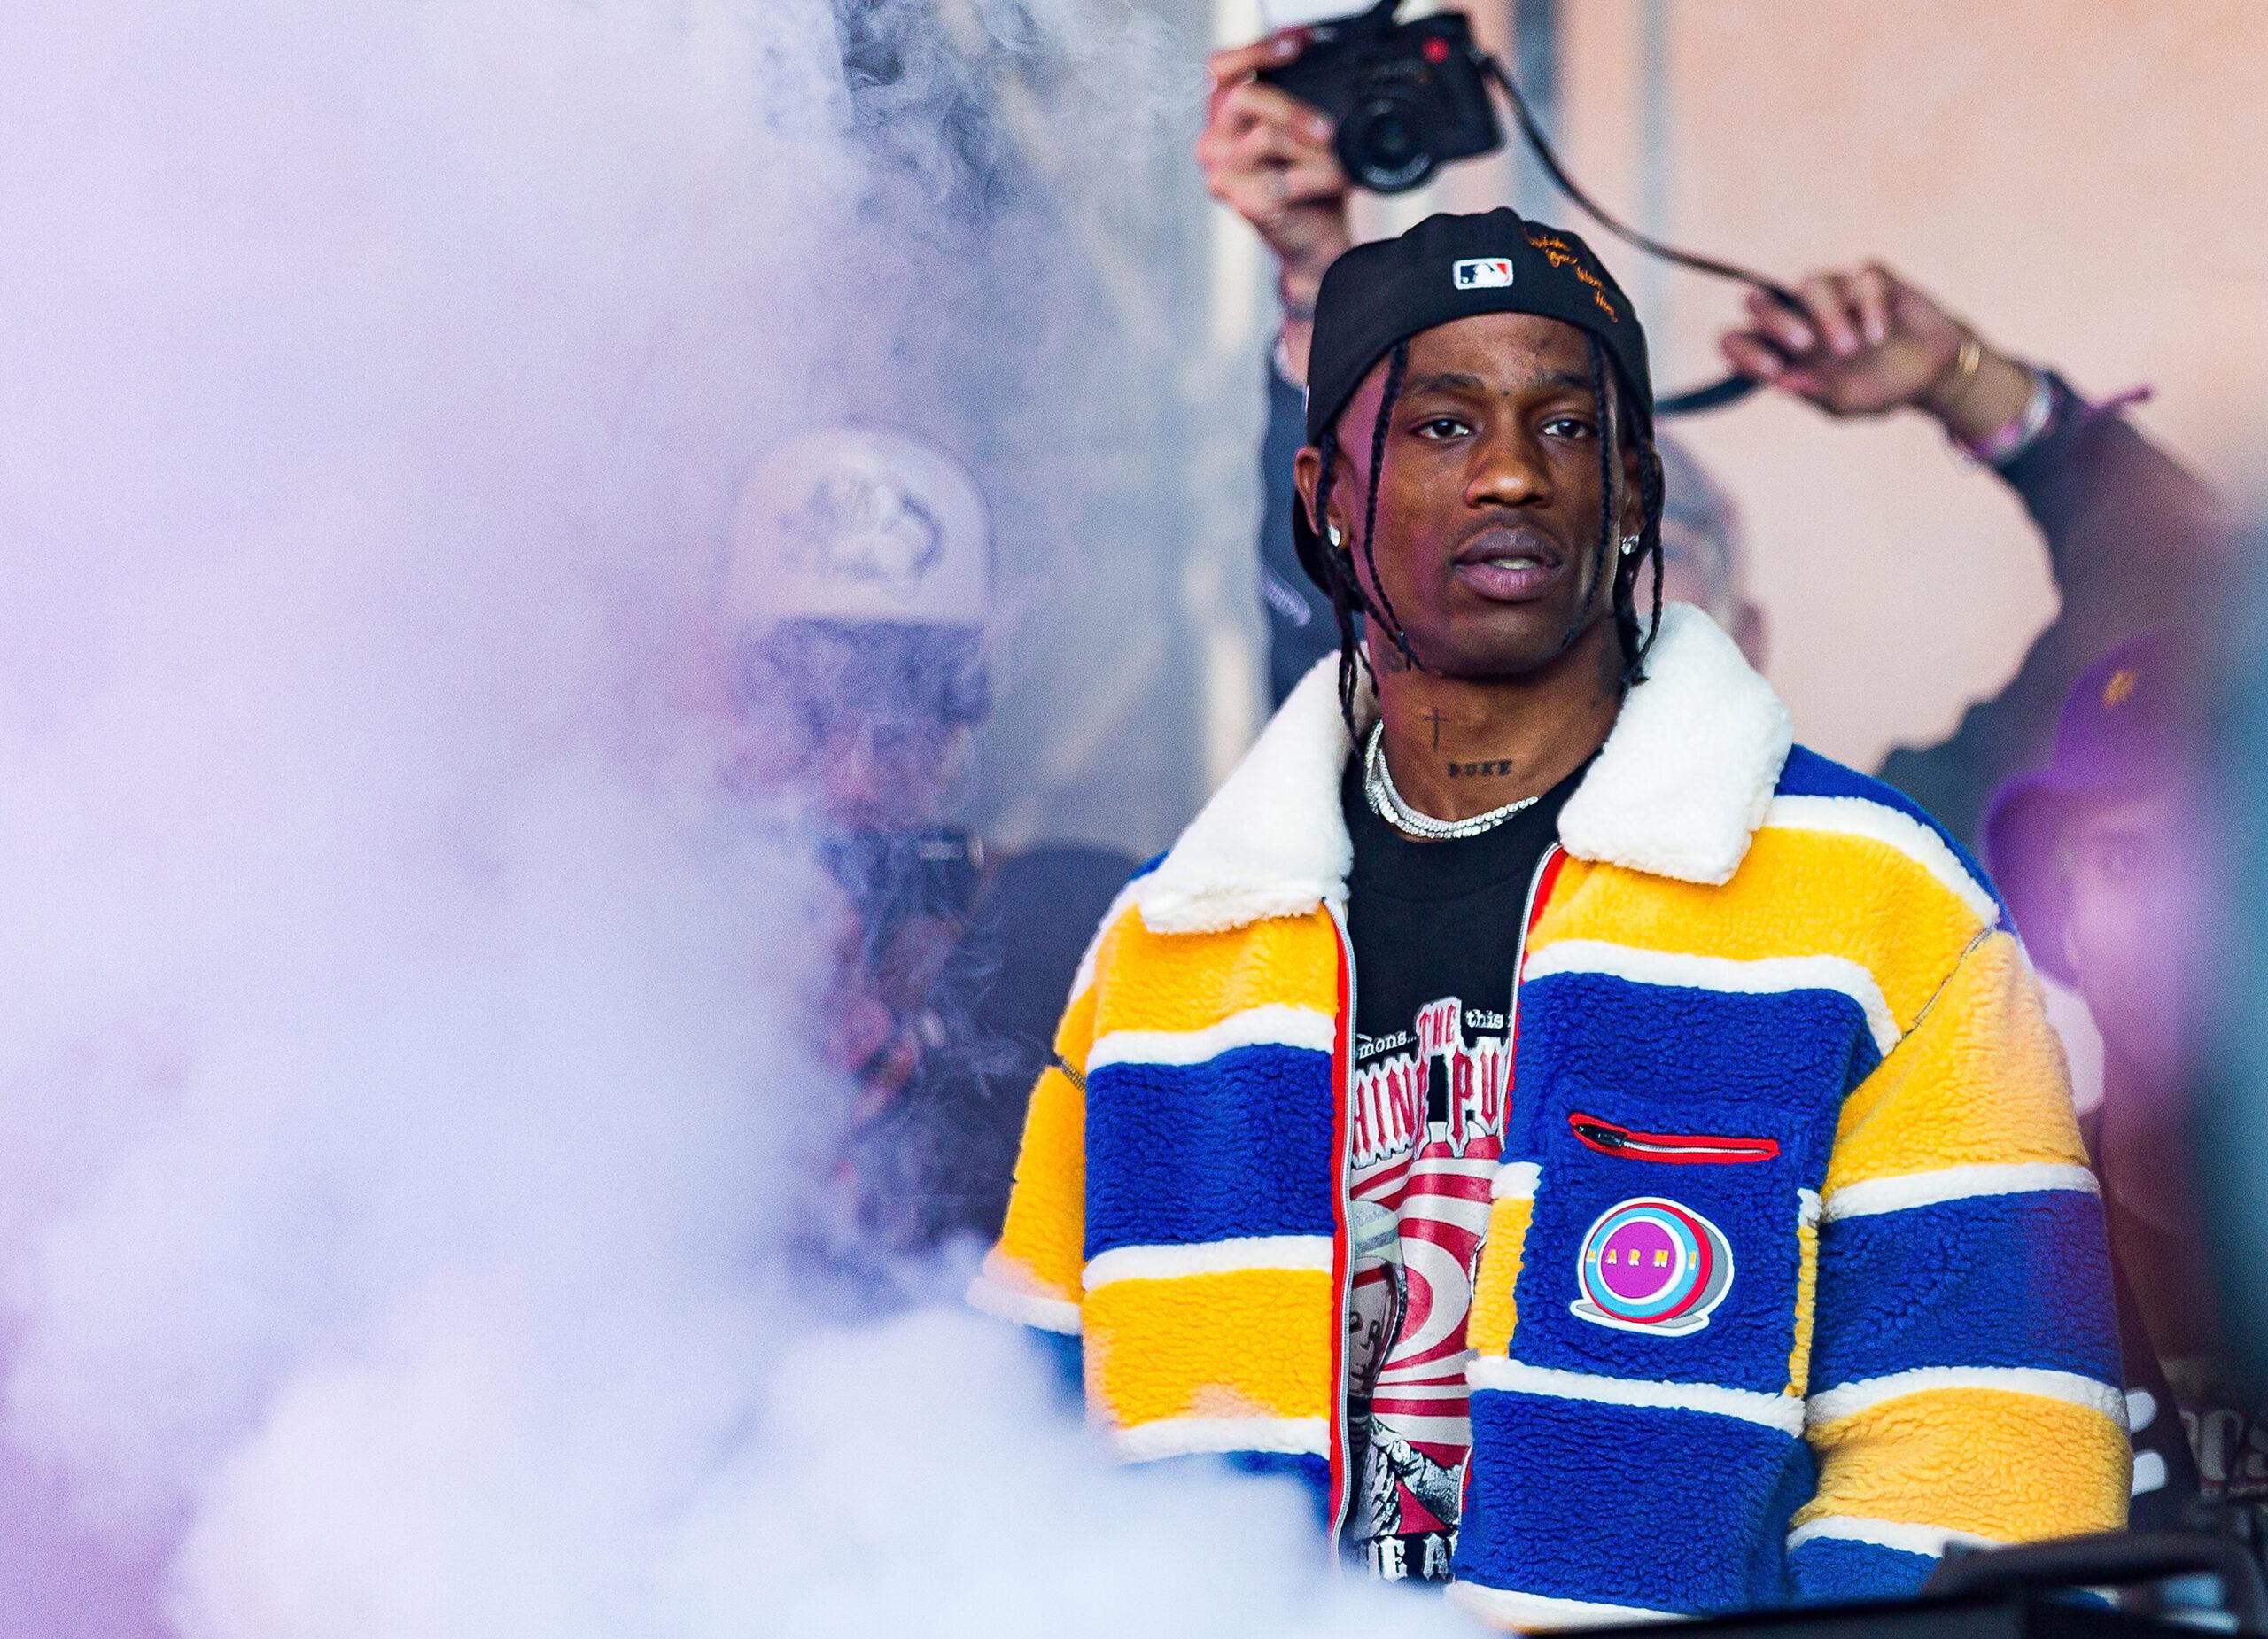 Travis Scott Concert Deaths: Wild Theory Emerges For Cause Of Mass Killings